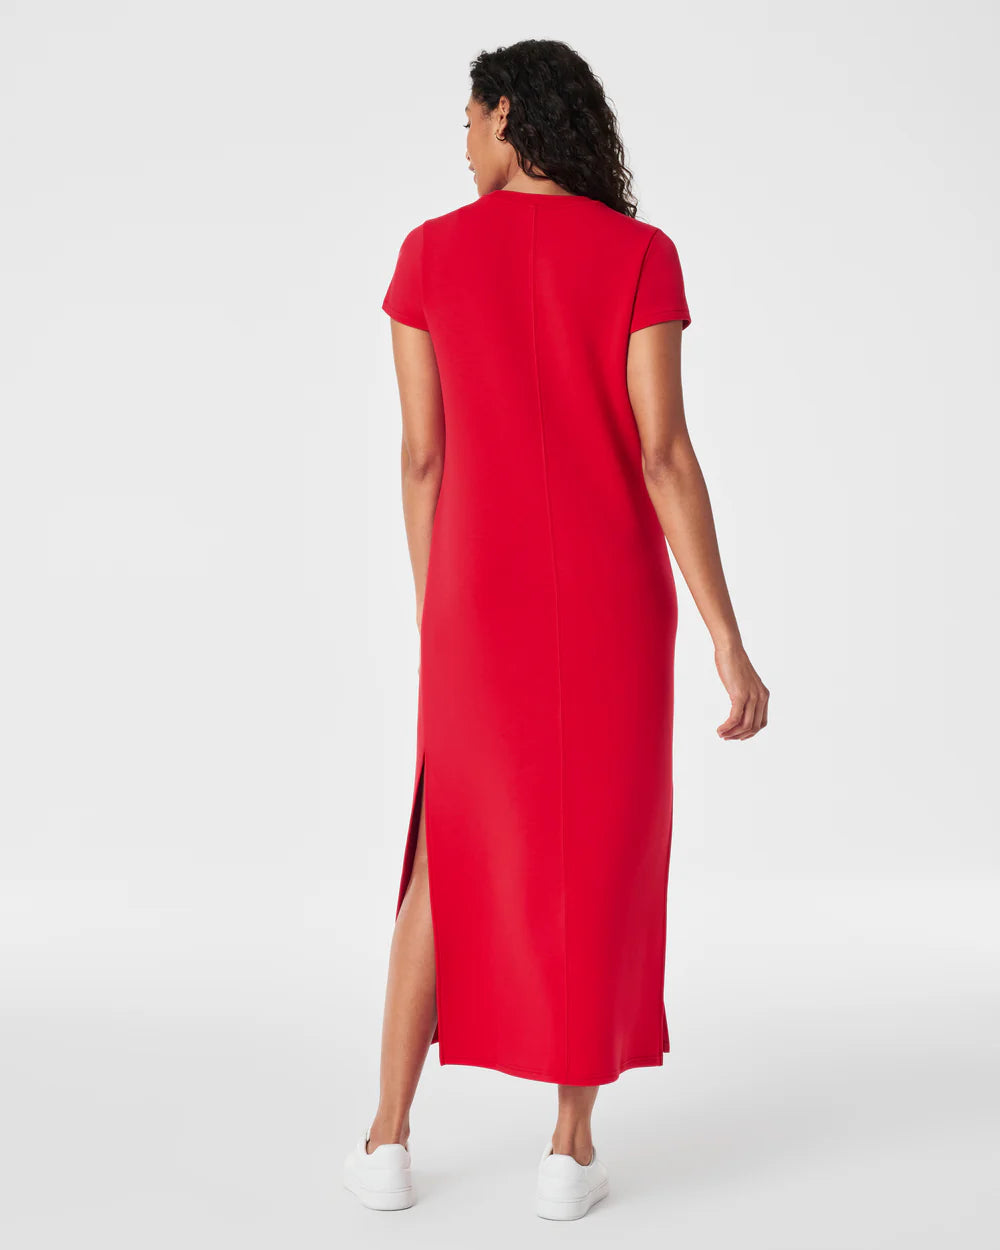 AirEssentials Maxi Dress in Spanx Red